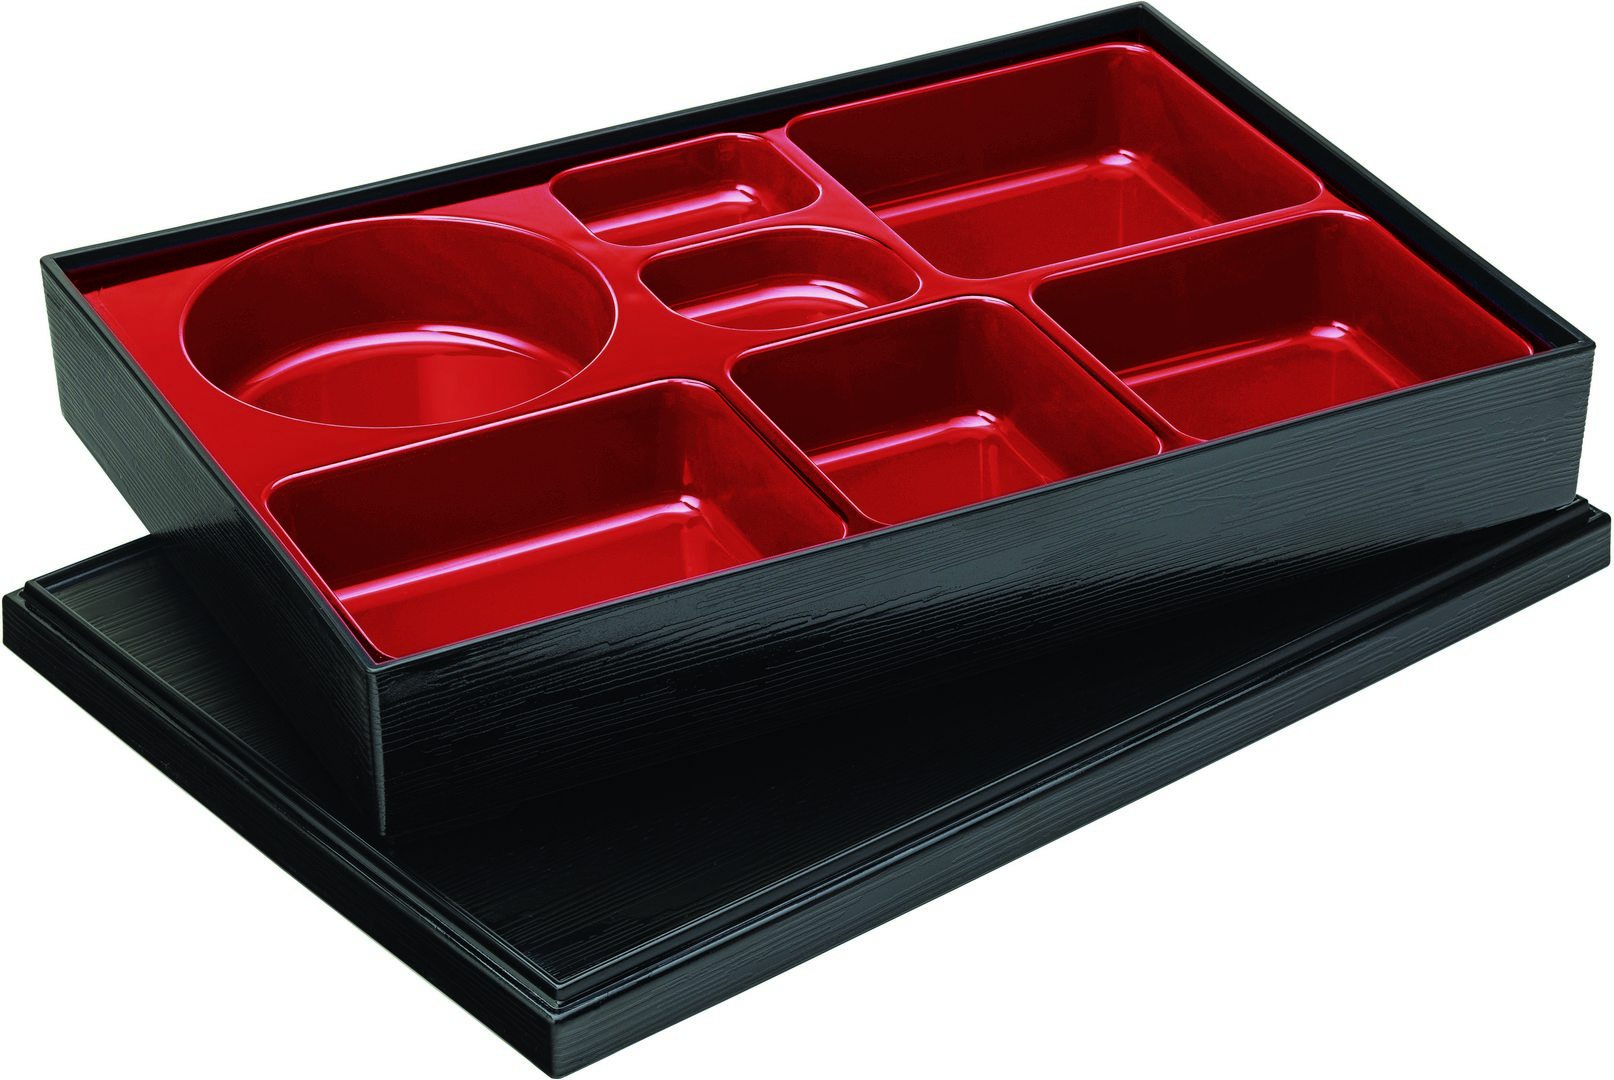 Luxe Bento Box (37 x 25.5 x 6.5cm) 7 compartment - JMP302-000000-B01006 (Pack of 6)